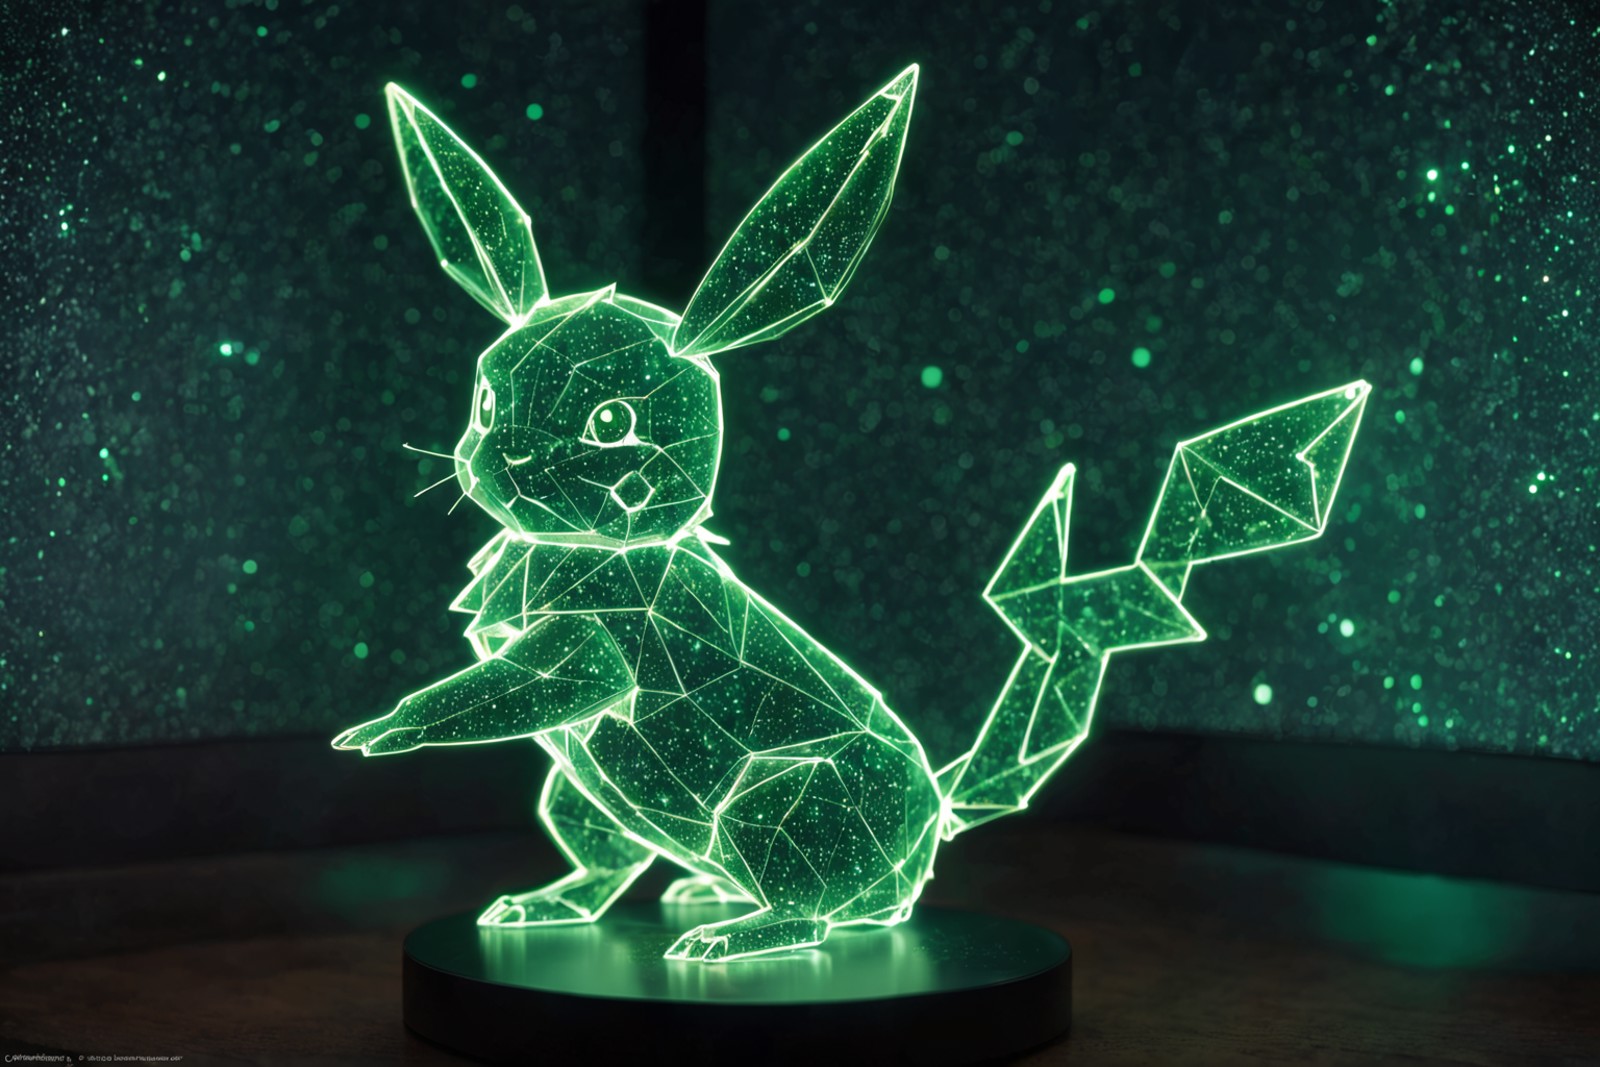 c0nst3llation, ((a transparent neon green pikachu made out of constellation style and signs with stars)), bokeh matrix gre...